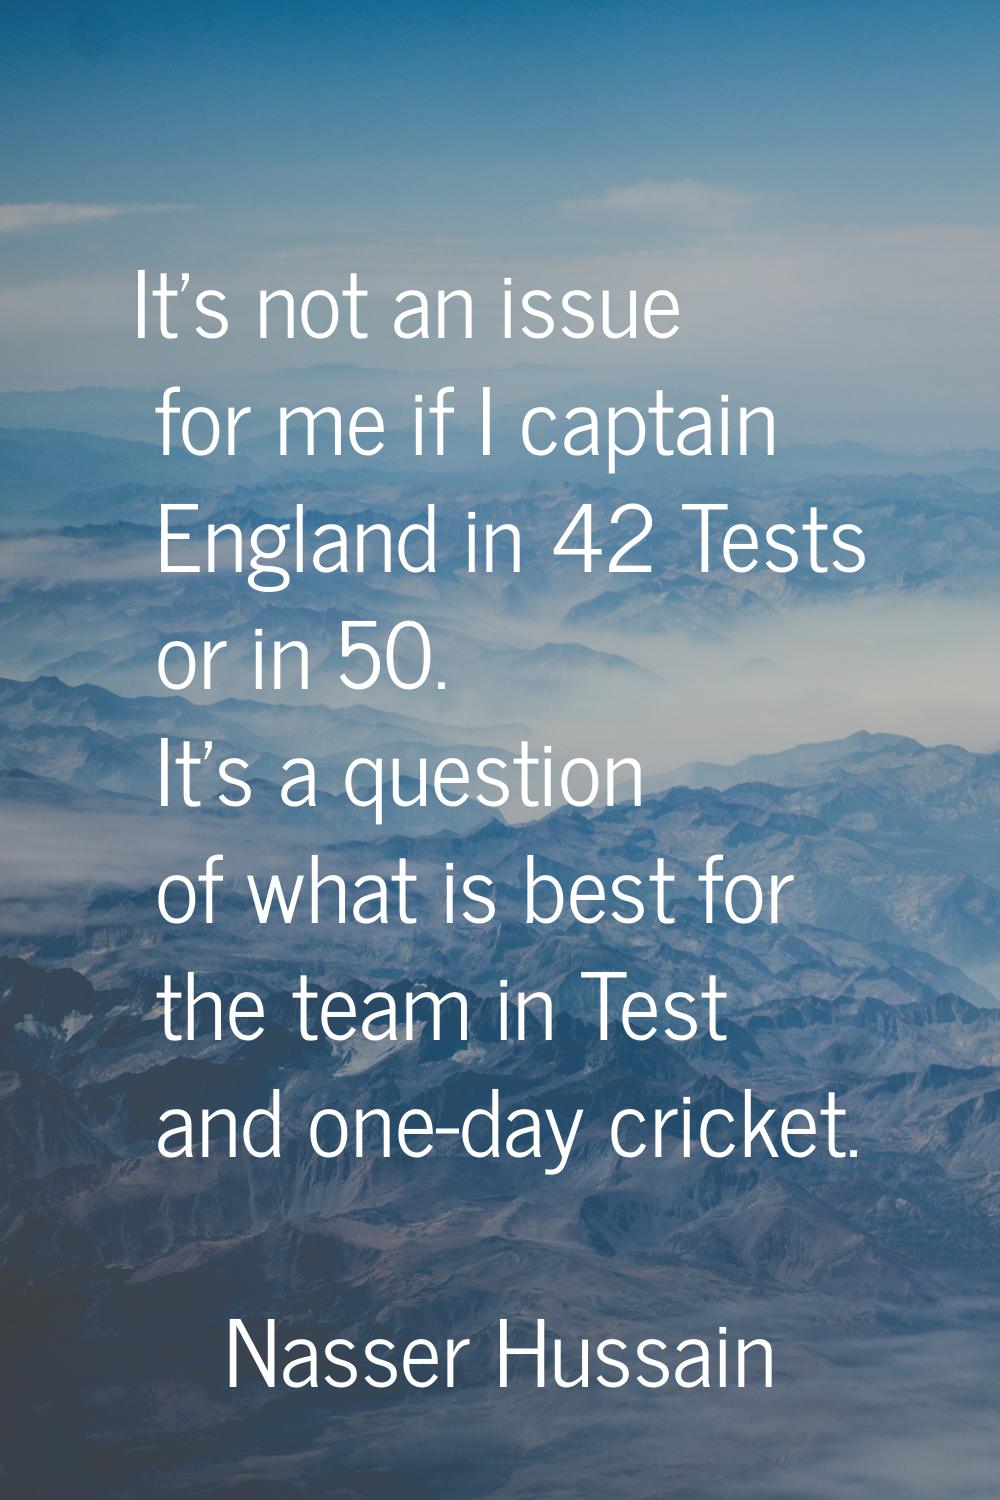 It's not an issue for me if I captain England in 42 Tests or in 50. It's a question of what is best